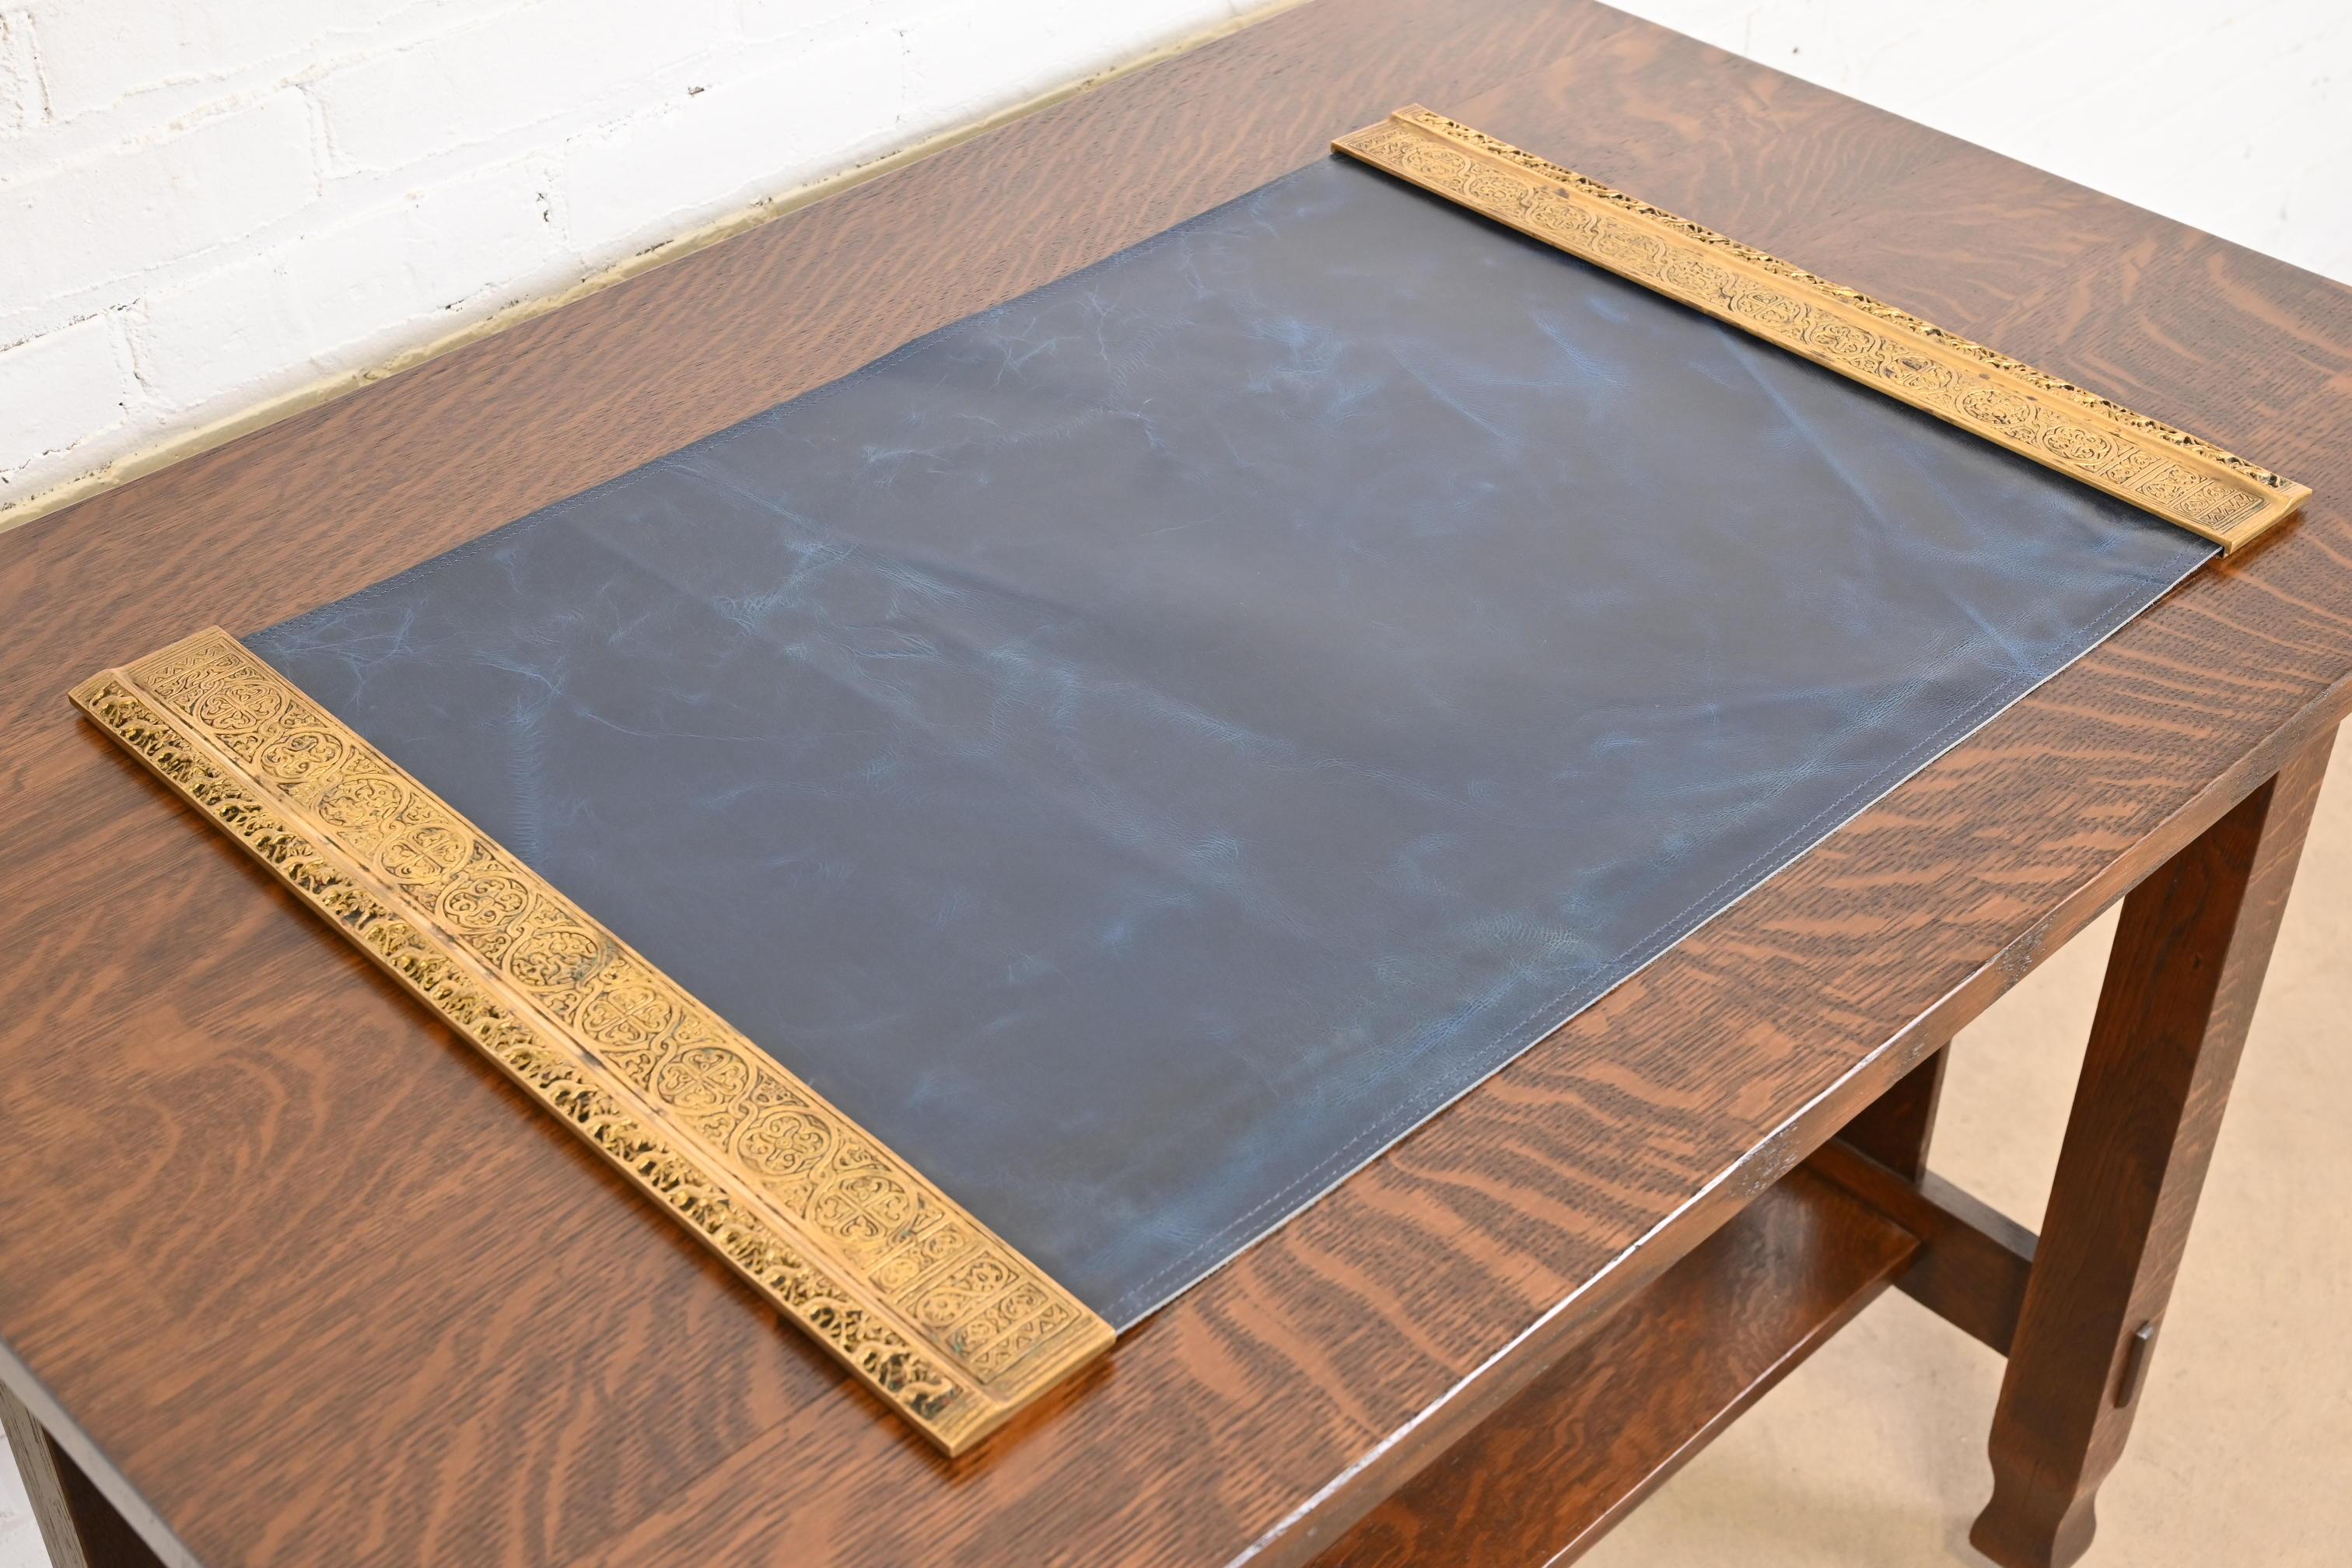 20th Century Tiffany Studios New York Venetian Bronze Doré Blotter Ends With Leather Desk Pad For Sale